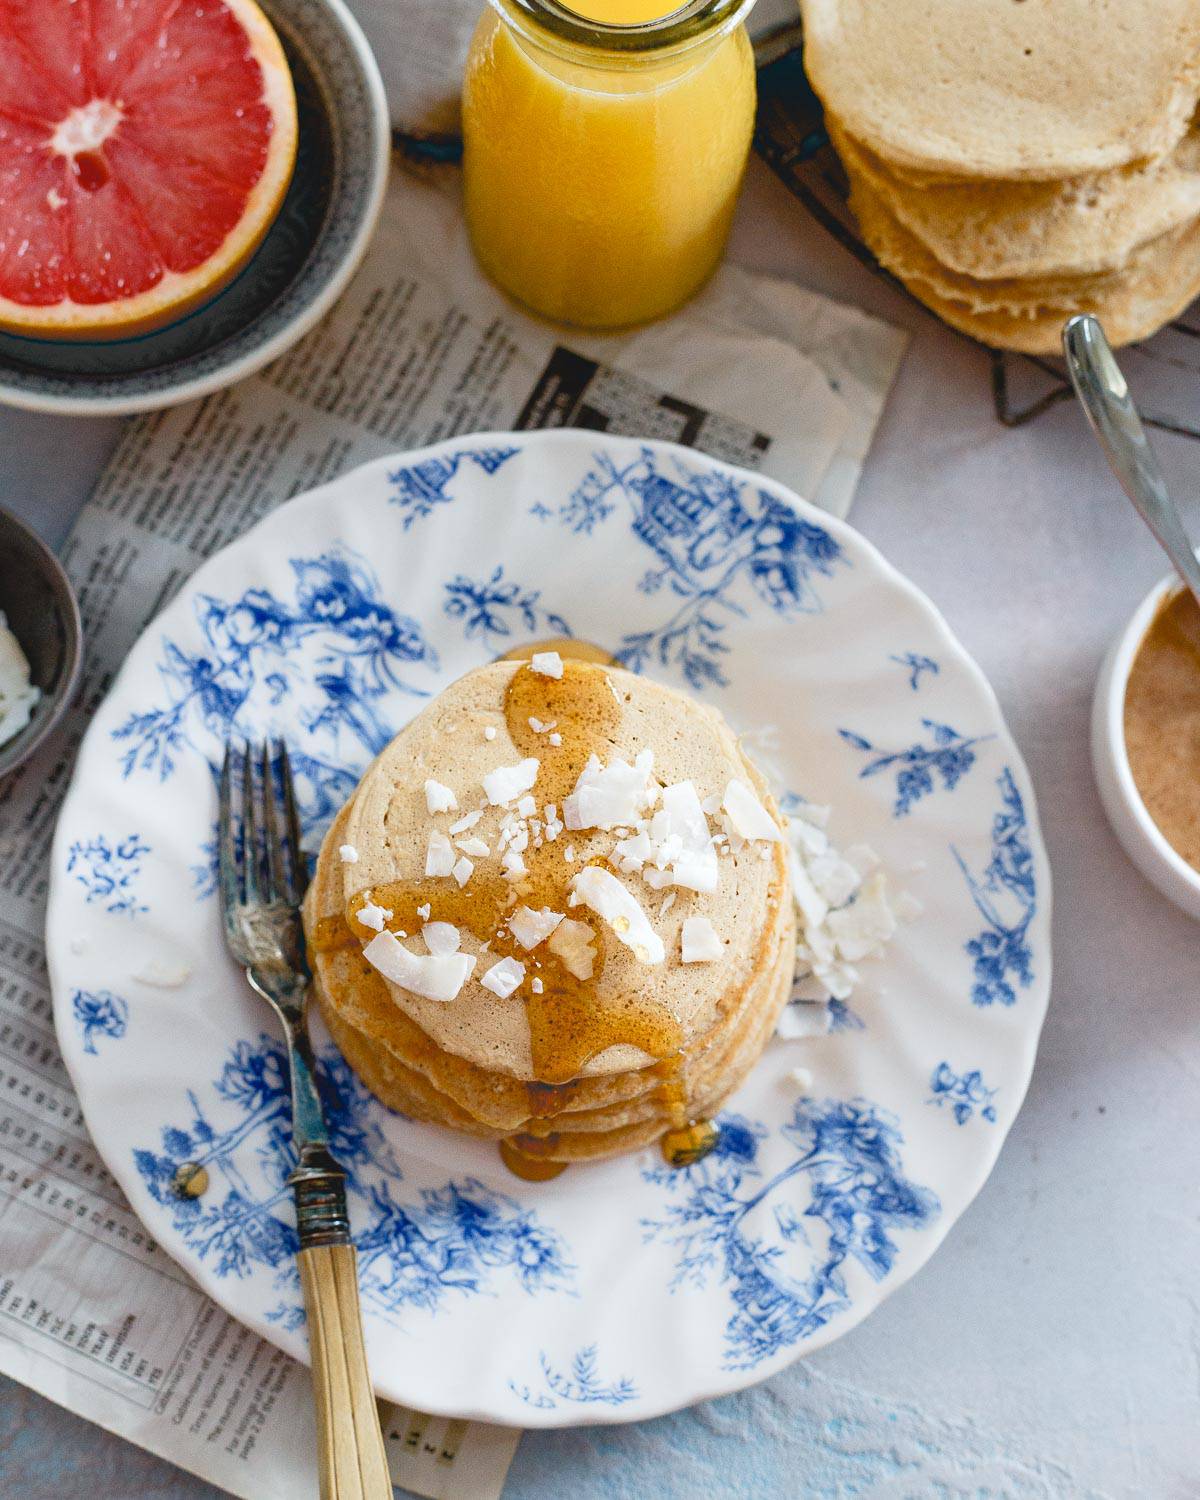 Spelt and coconut flour combine to make the perfect doughy and moist pancake breakfast.